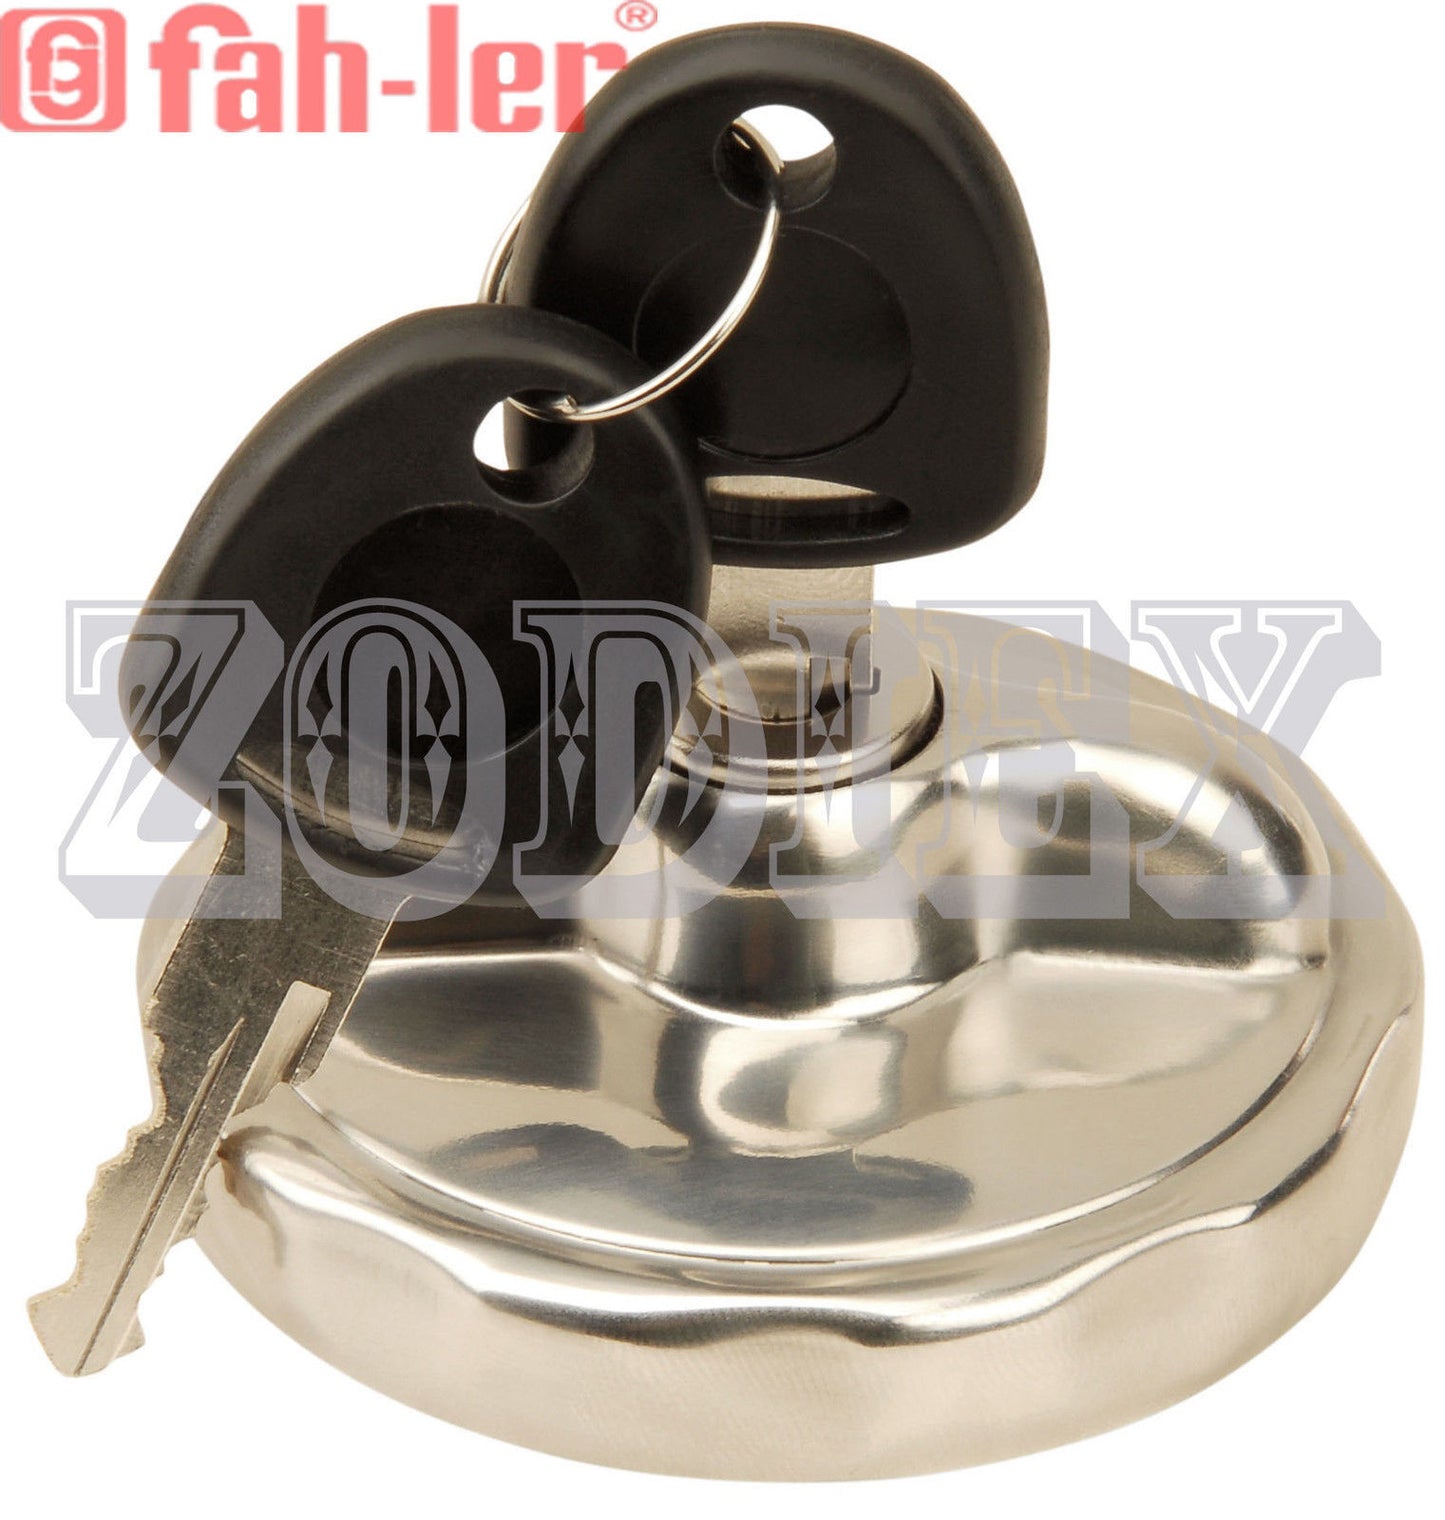 Stainless Steel Locking Fuel Gas / Tank Cap Mercedes Benz Alfa Romeo Ford Opel